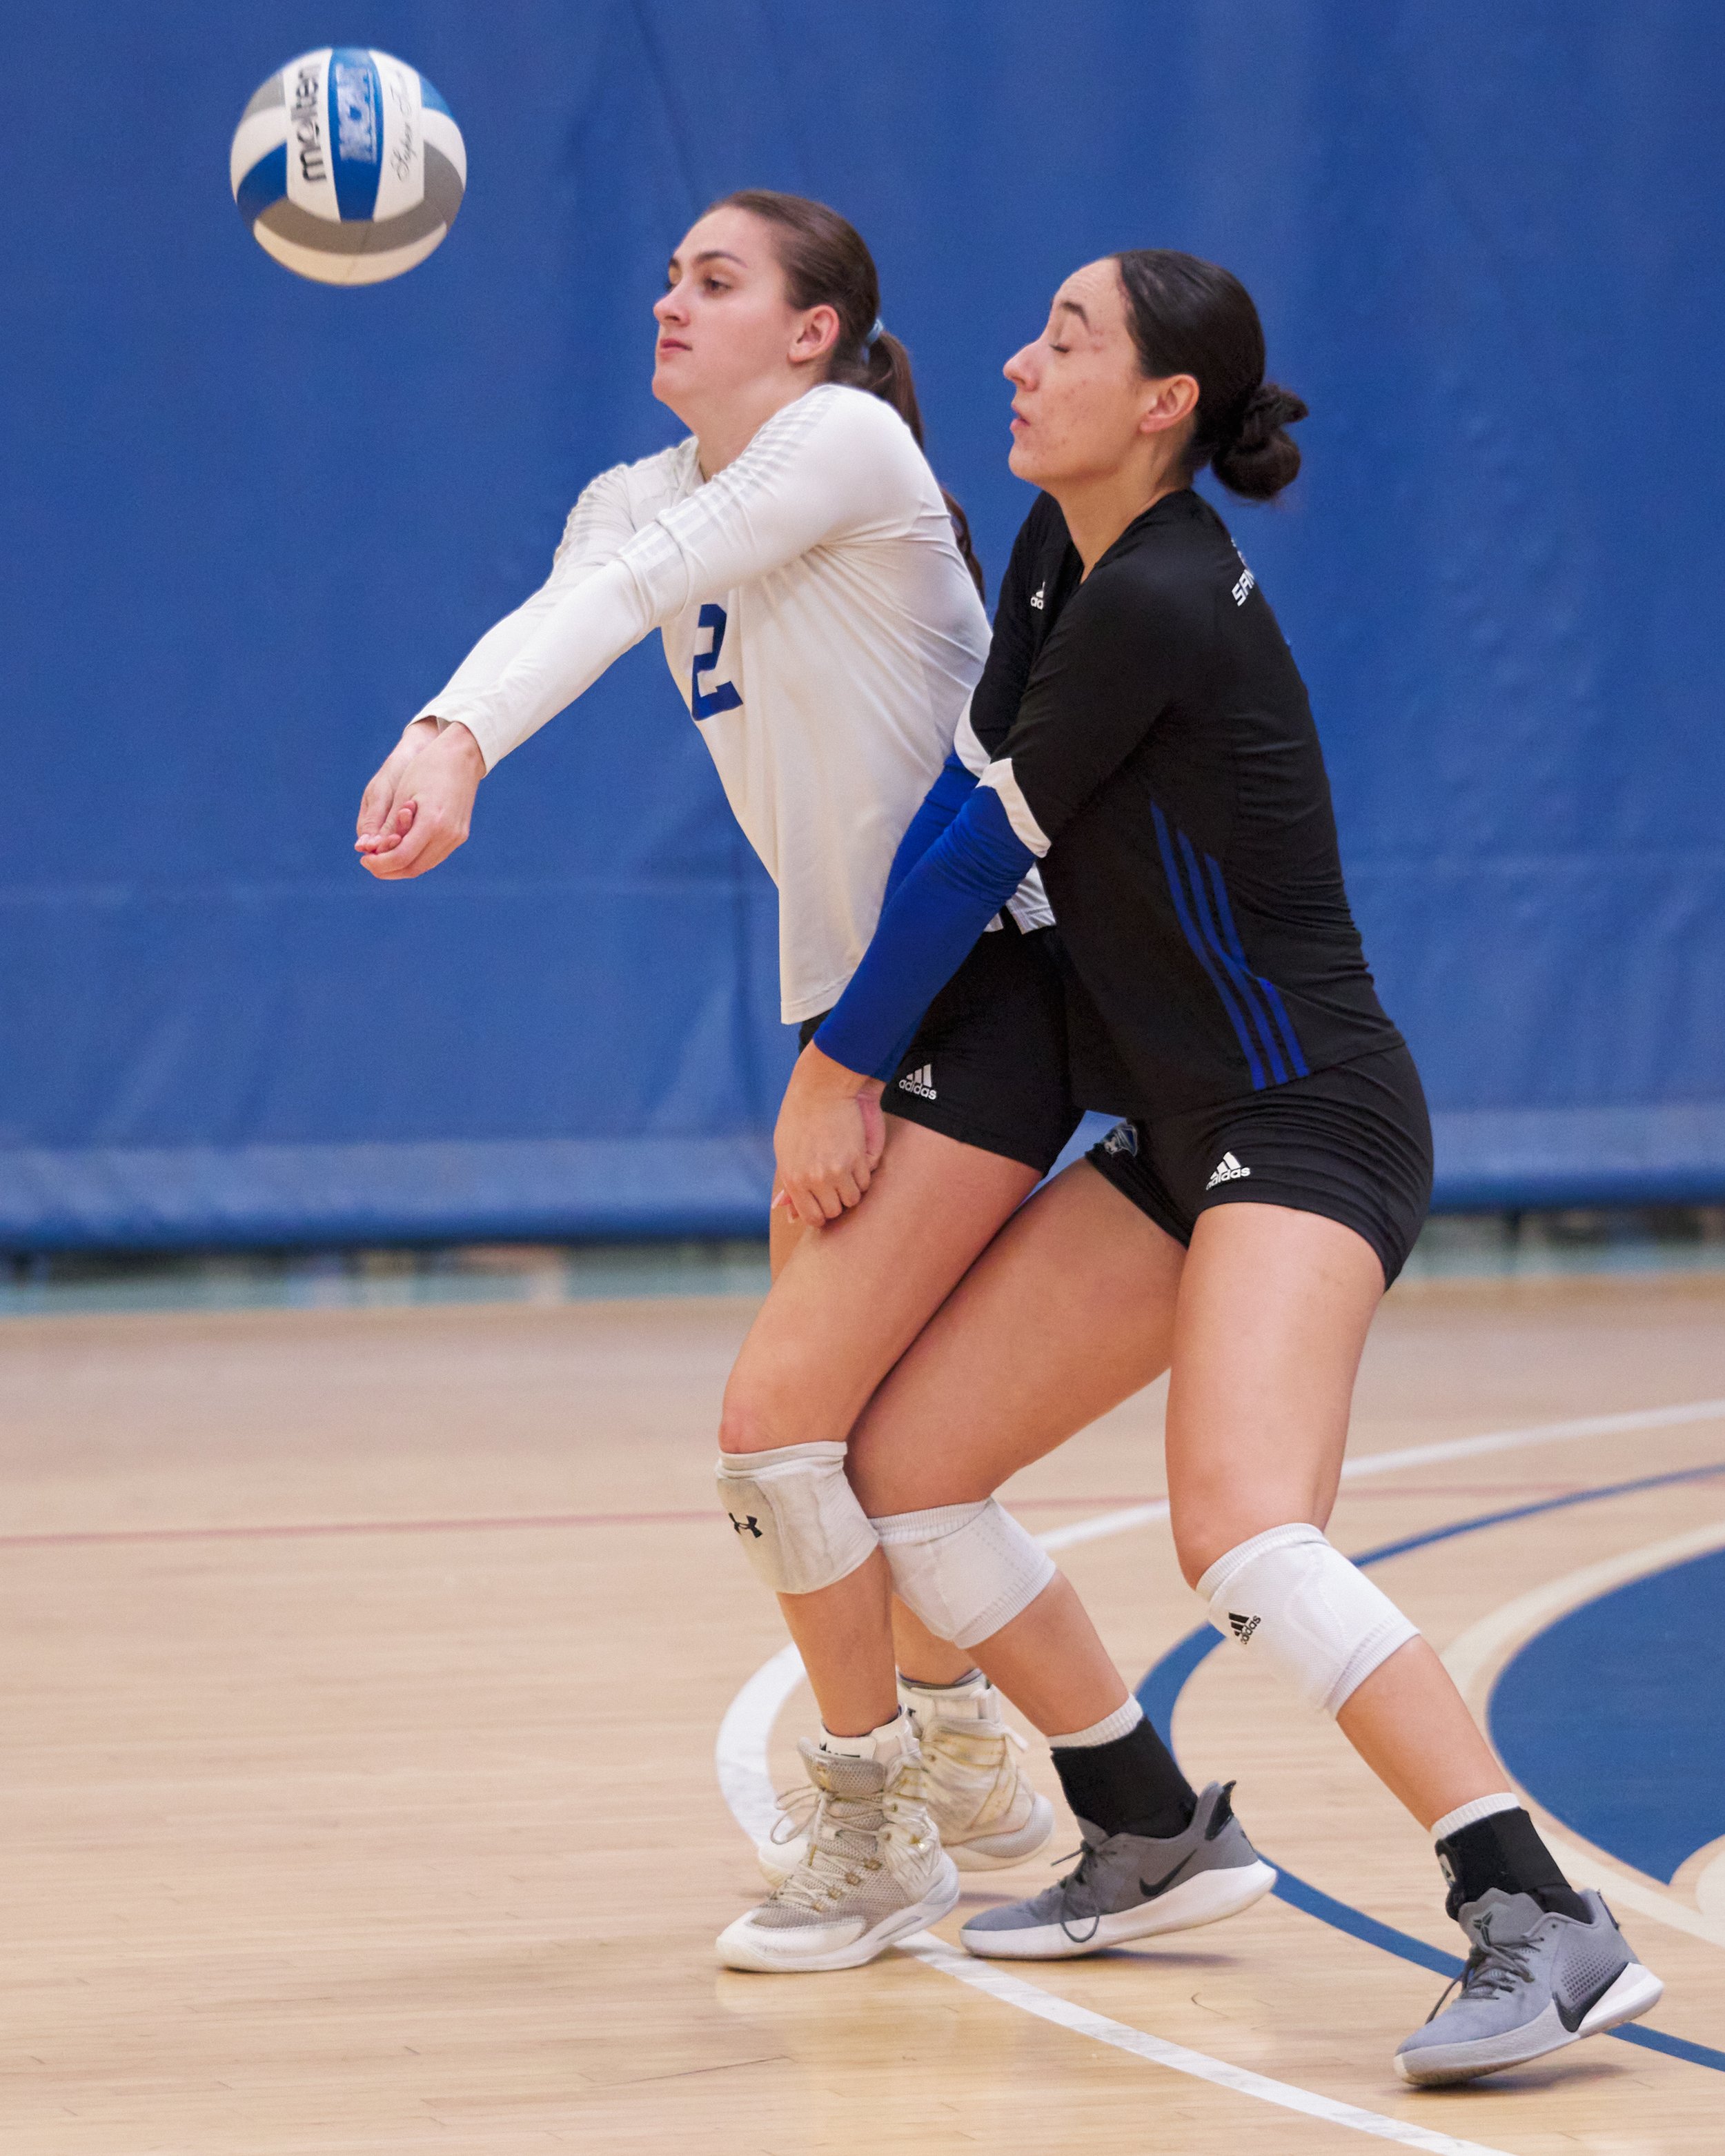  Santa Monica College Corsairs' Prior Borick and Natalie Fernandez collide while receiving a serve from the Cuyamaca College Coyotes during the women's volleyball match on Wednesday, Sept. 6, 2023, at the SMC Gym in Santa Monica, Calif. The Corsairs 